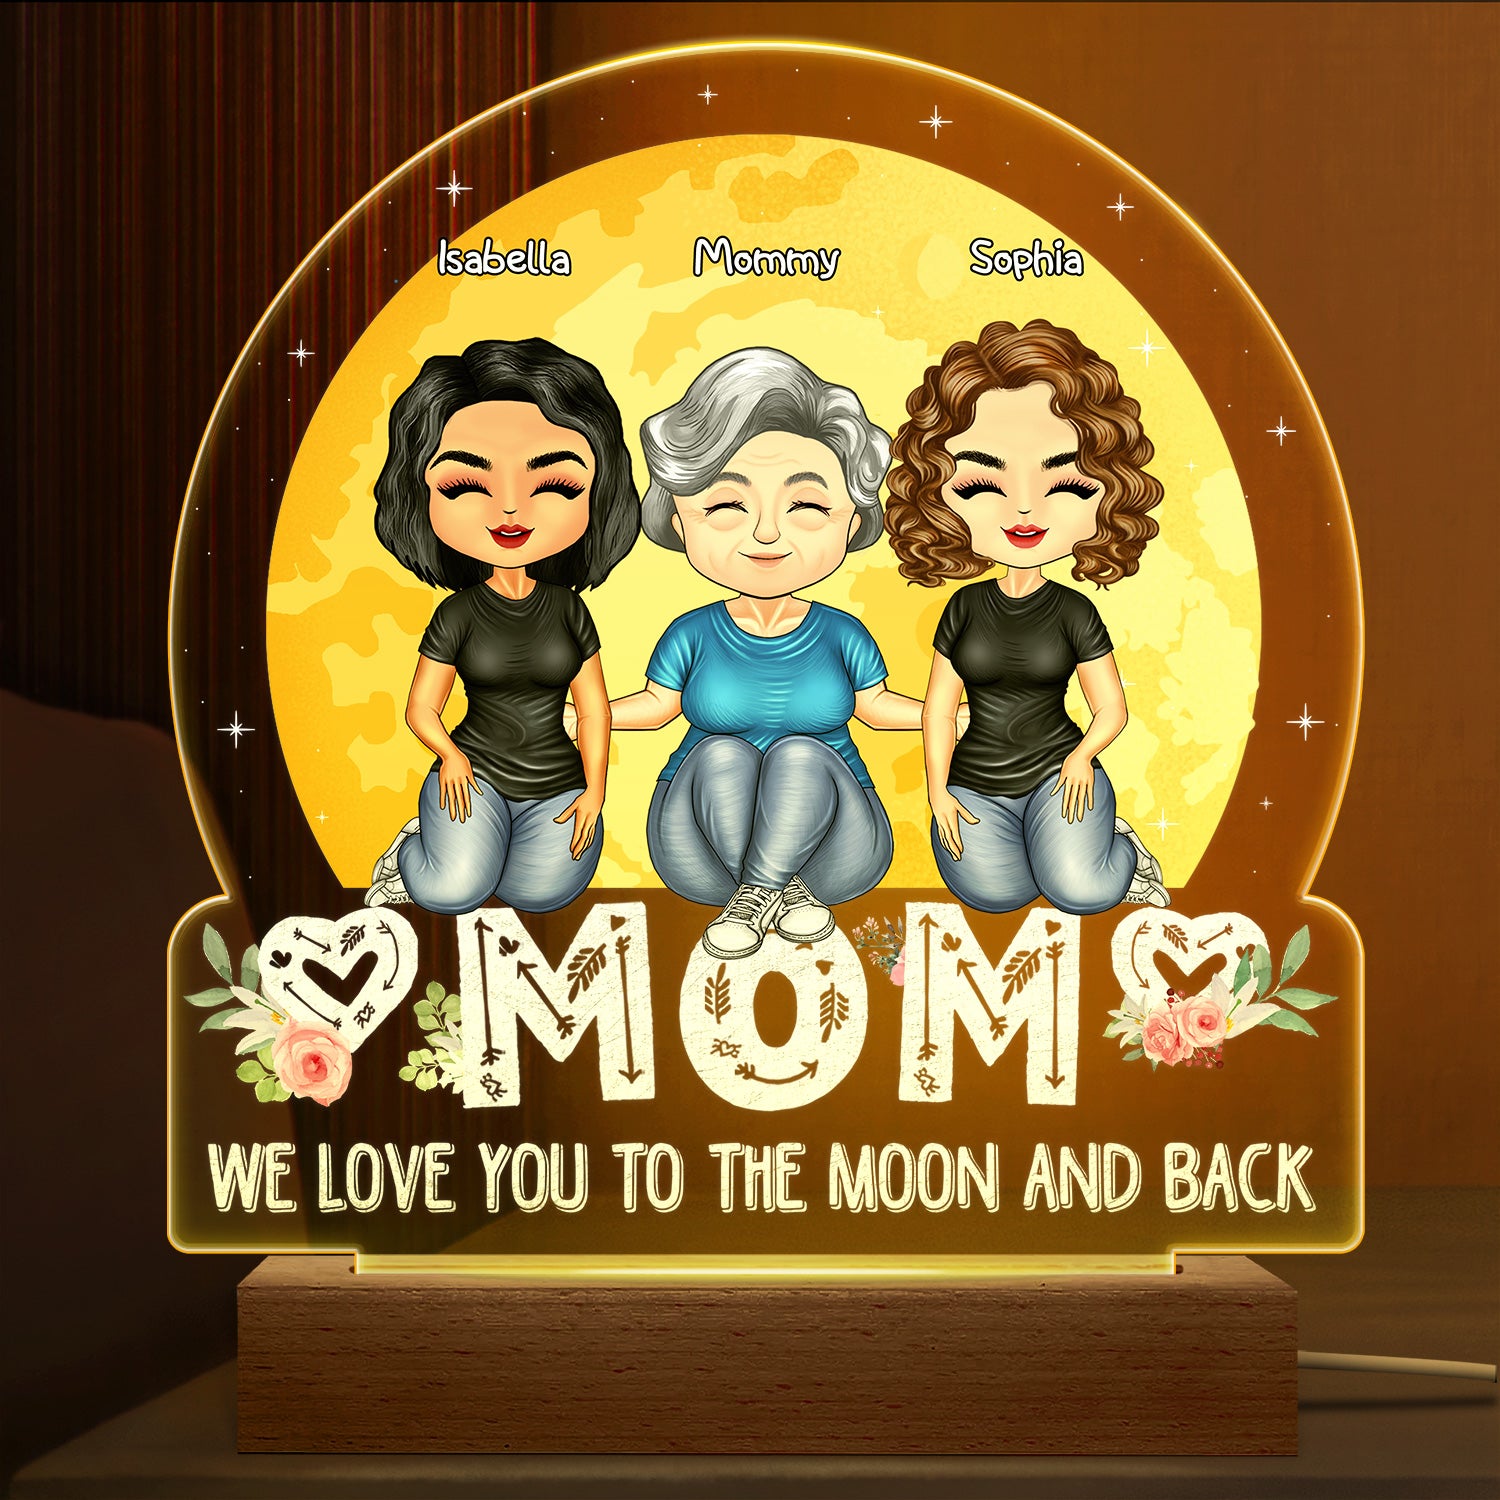 I Love You To The Moon And Back - Birthday, Loving Gift For Mom, Mother, Grandma, Grandmother - Personalized Custom 3D Led Light Wooden Base